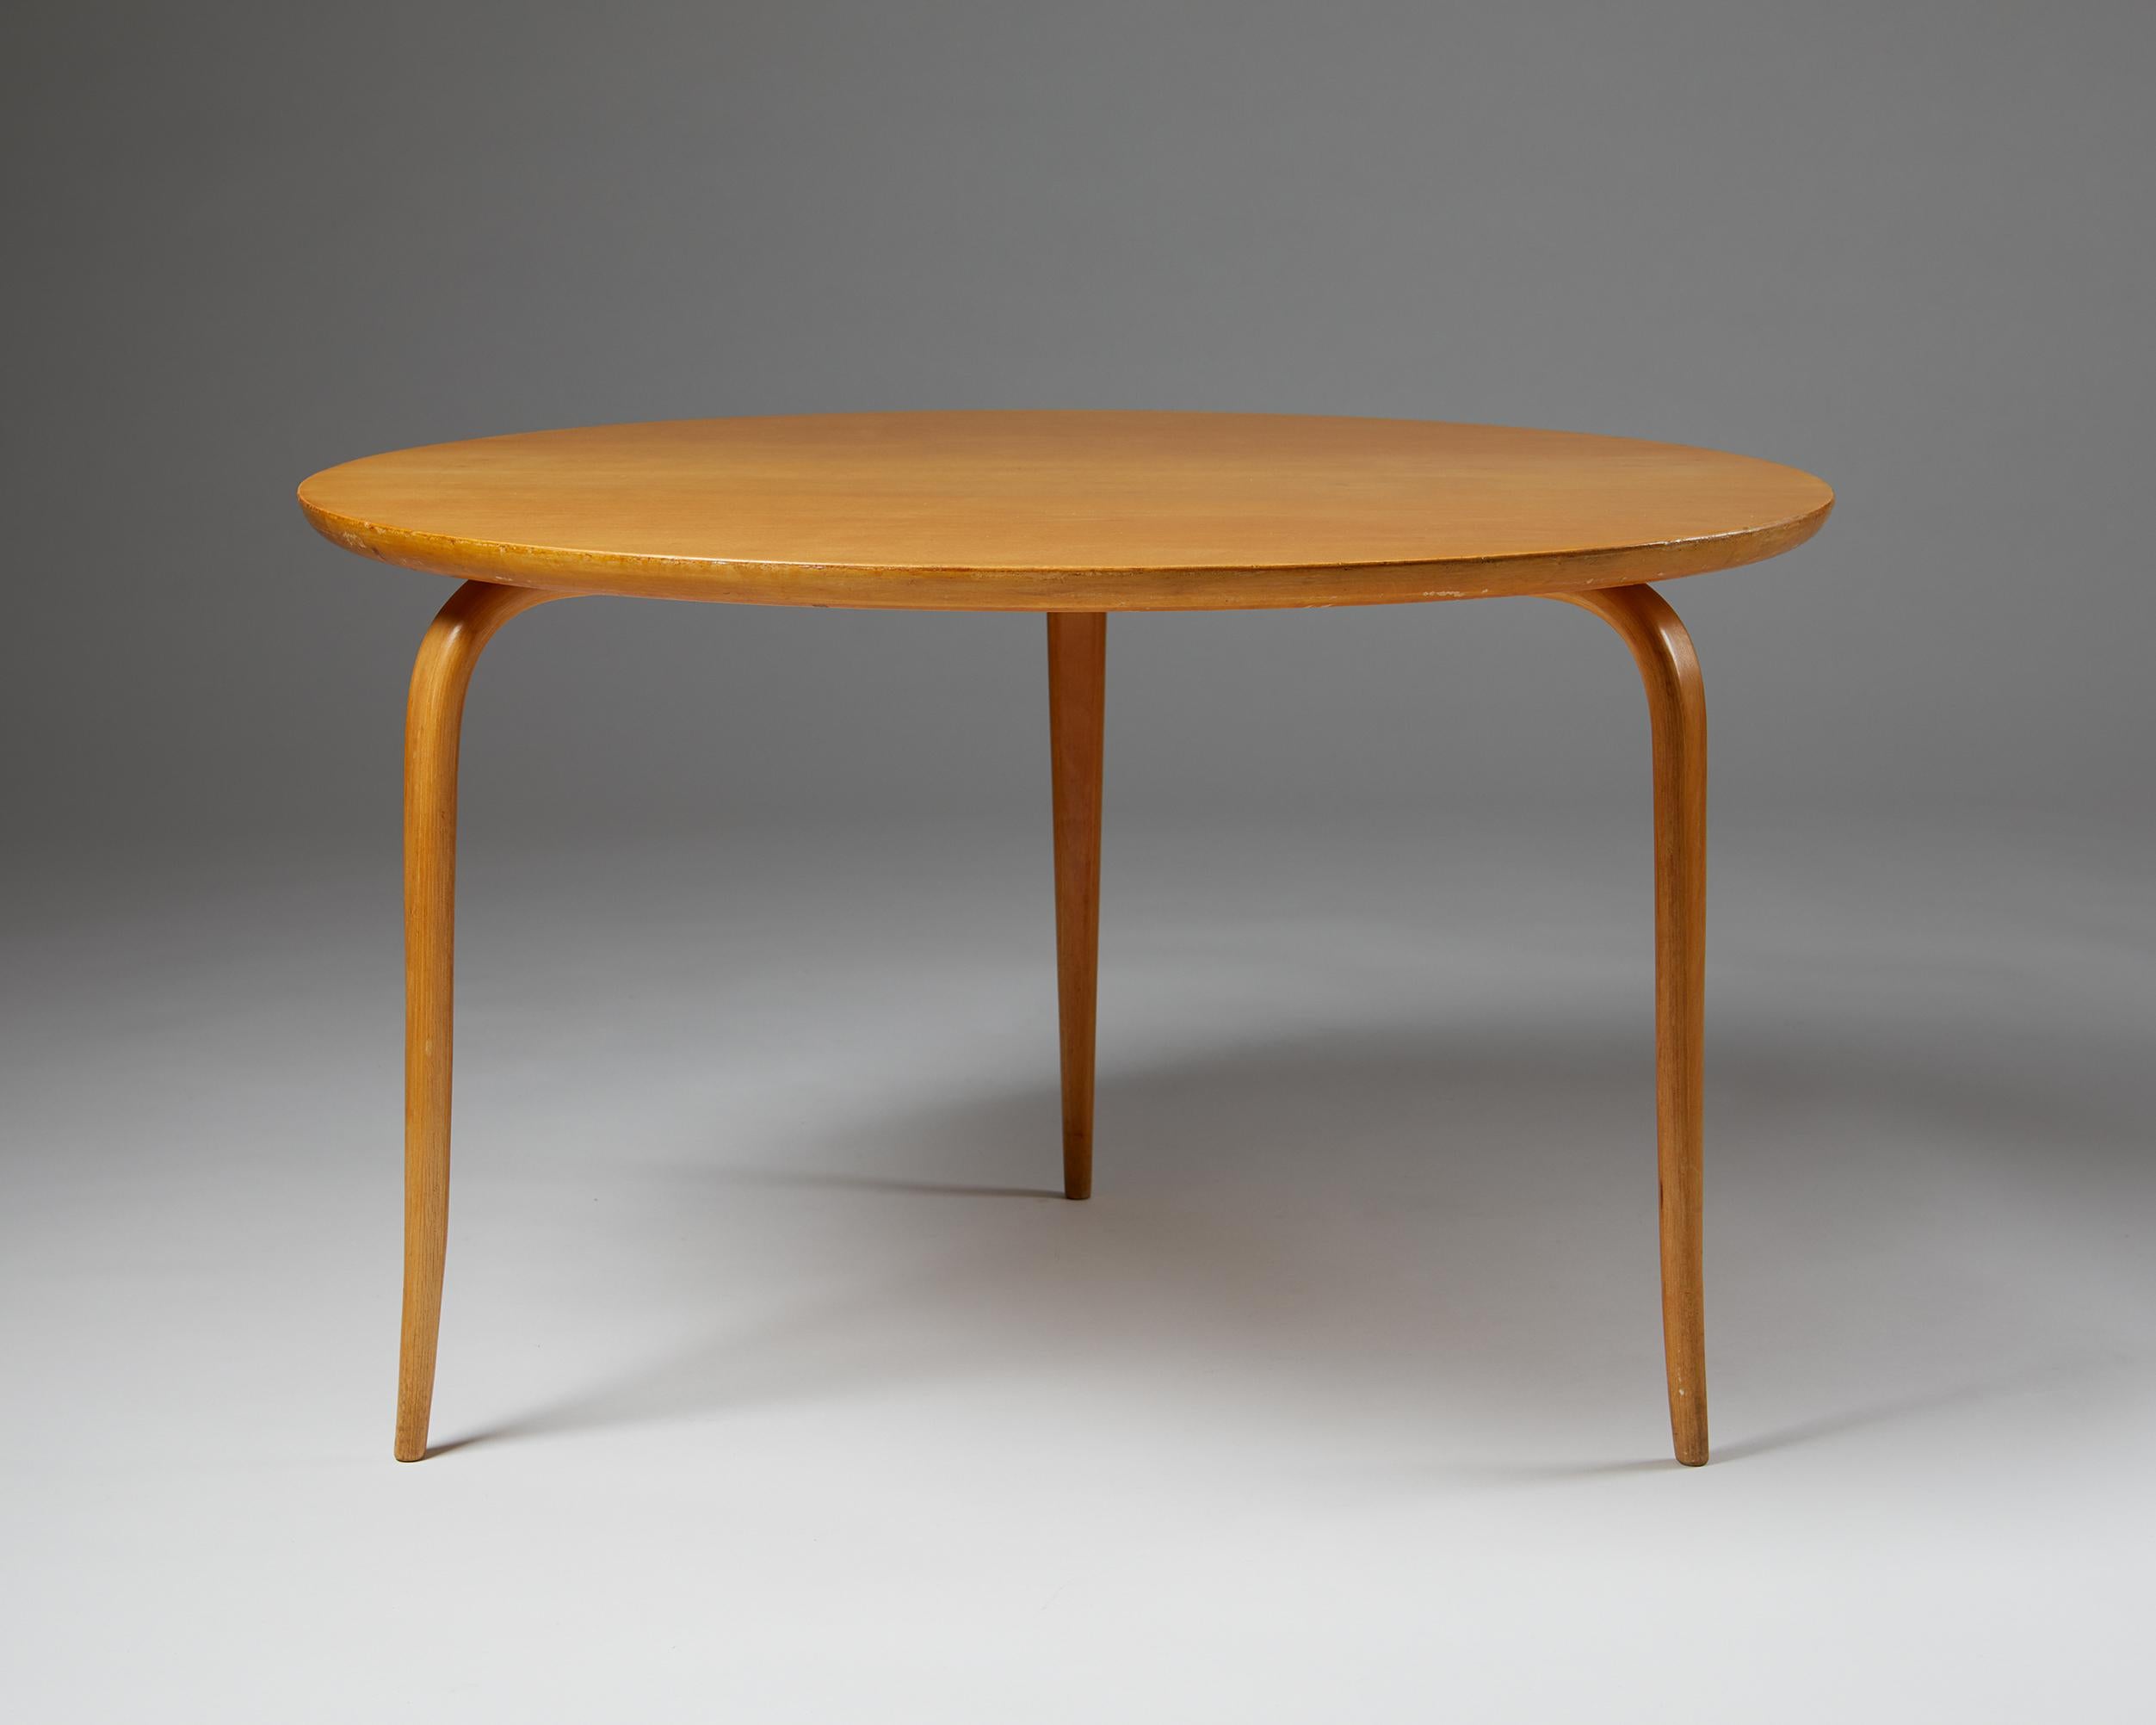 Mid-Century Modern Occasional Table “Annika” Designed by Bruno Mathsson for Karl Mathsson, Sweden  For Sale